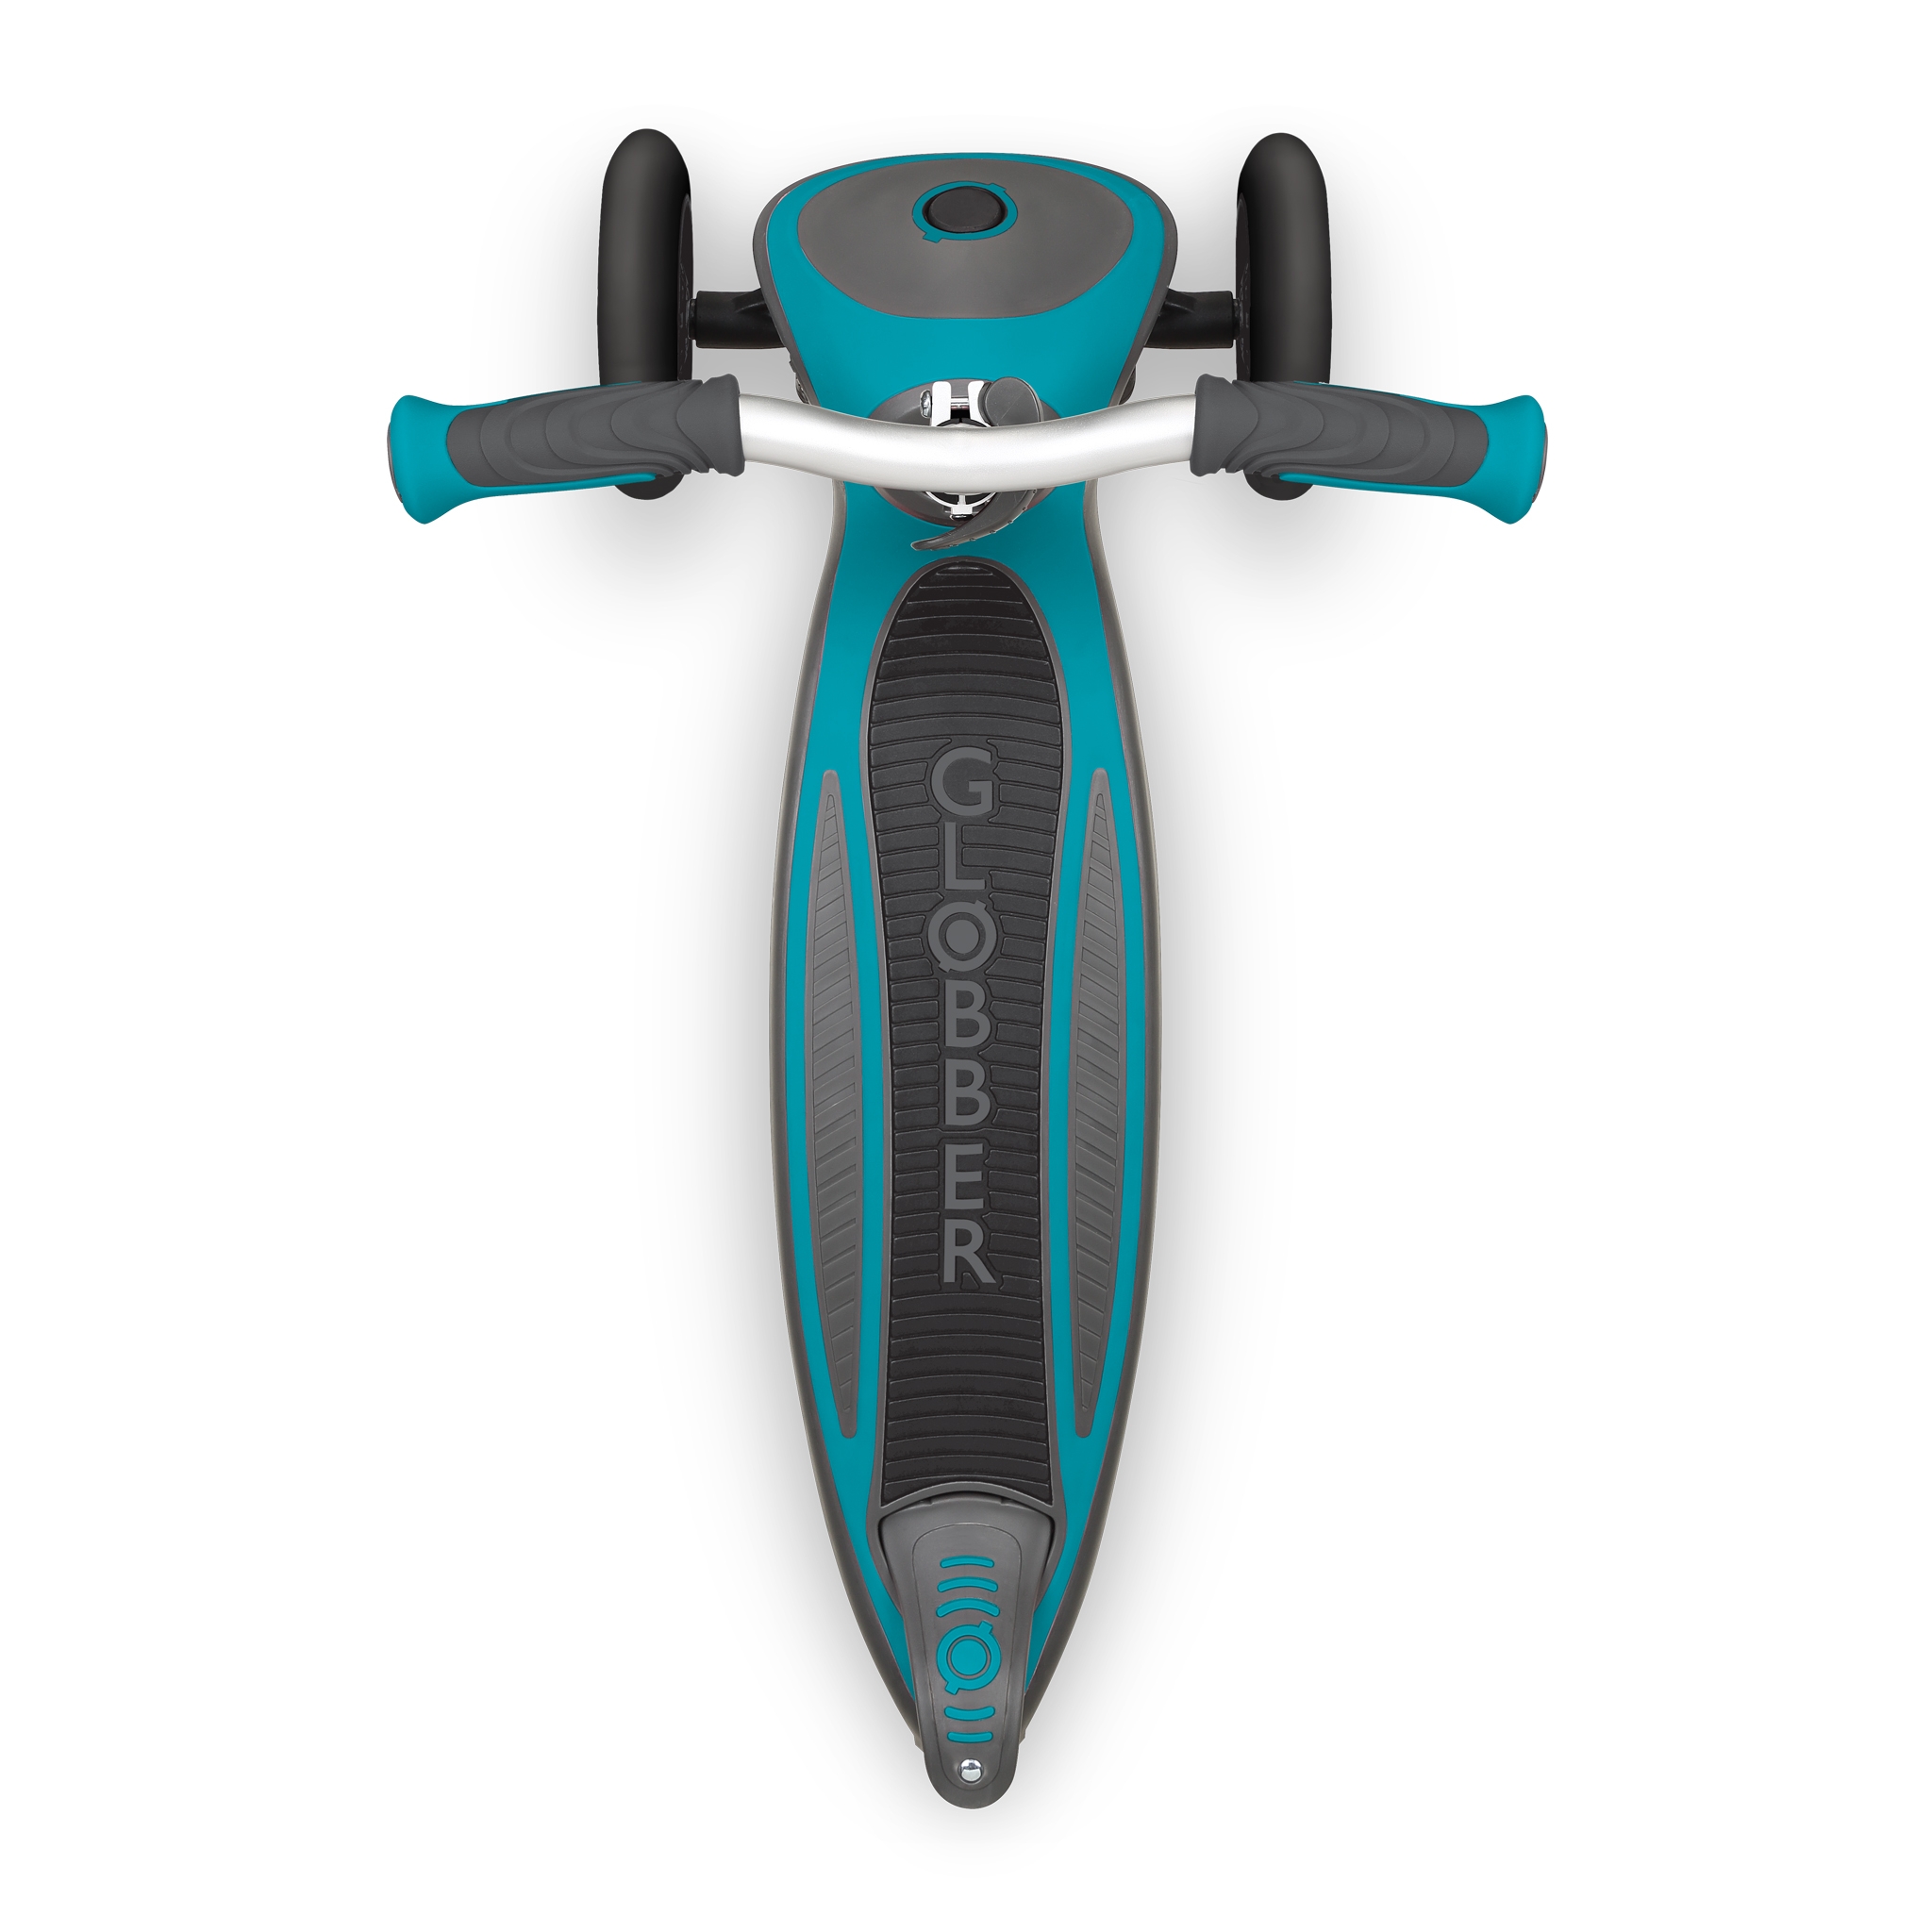 Globber-MASTER-3-wheel-foldable-scooter-for-kids-with-extra-wide-anti-slip-deck-for-comfortable-rides_teal 0